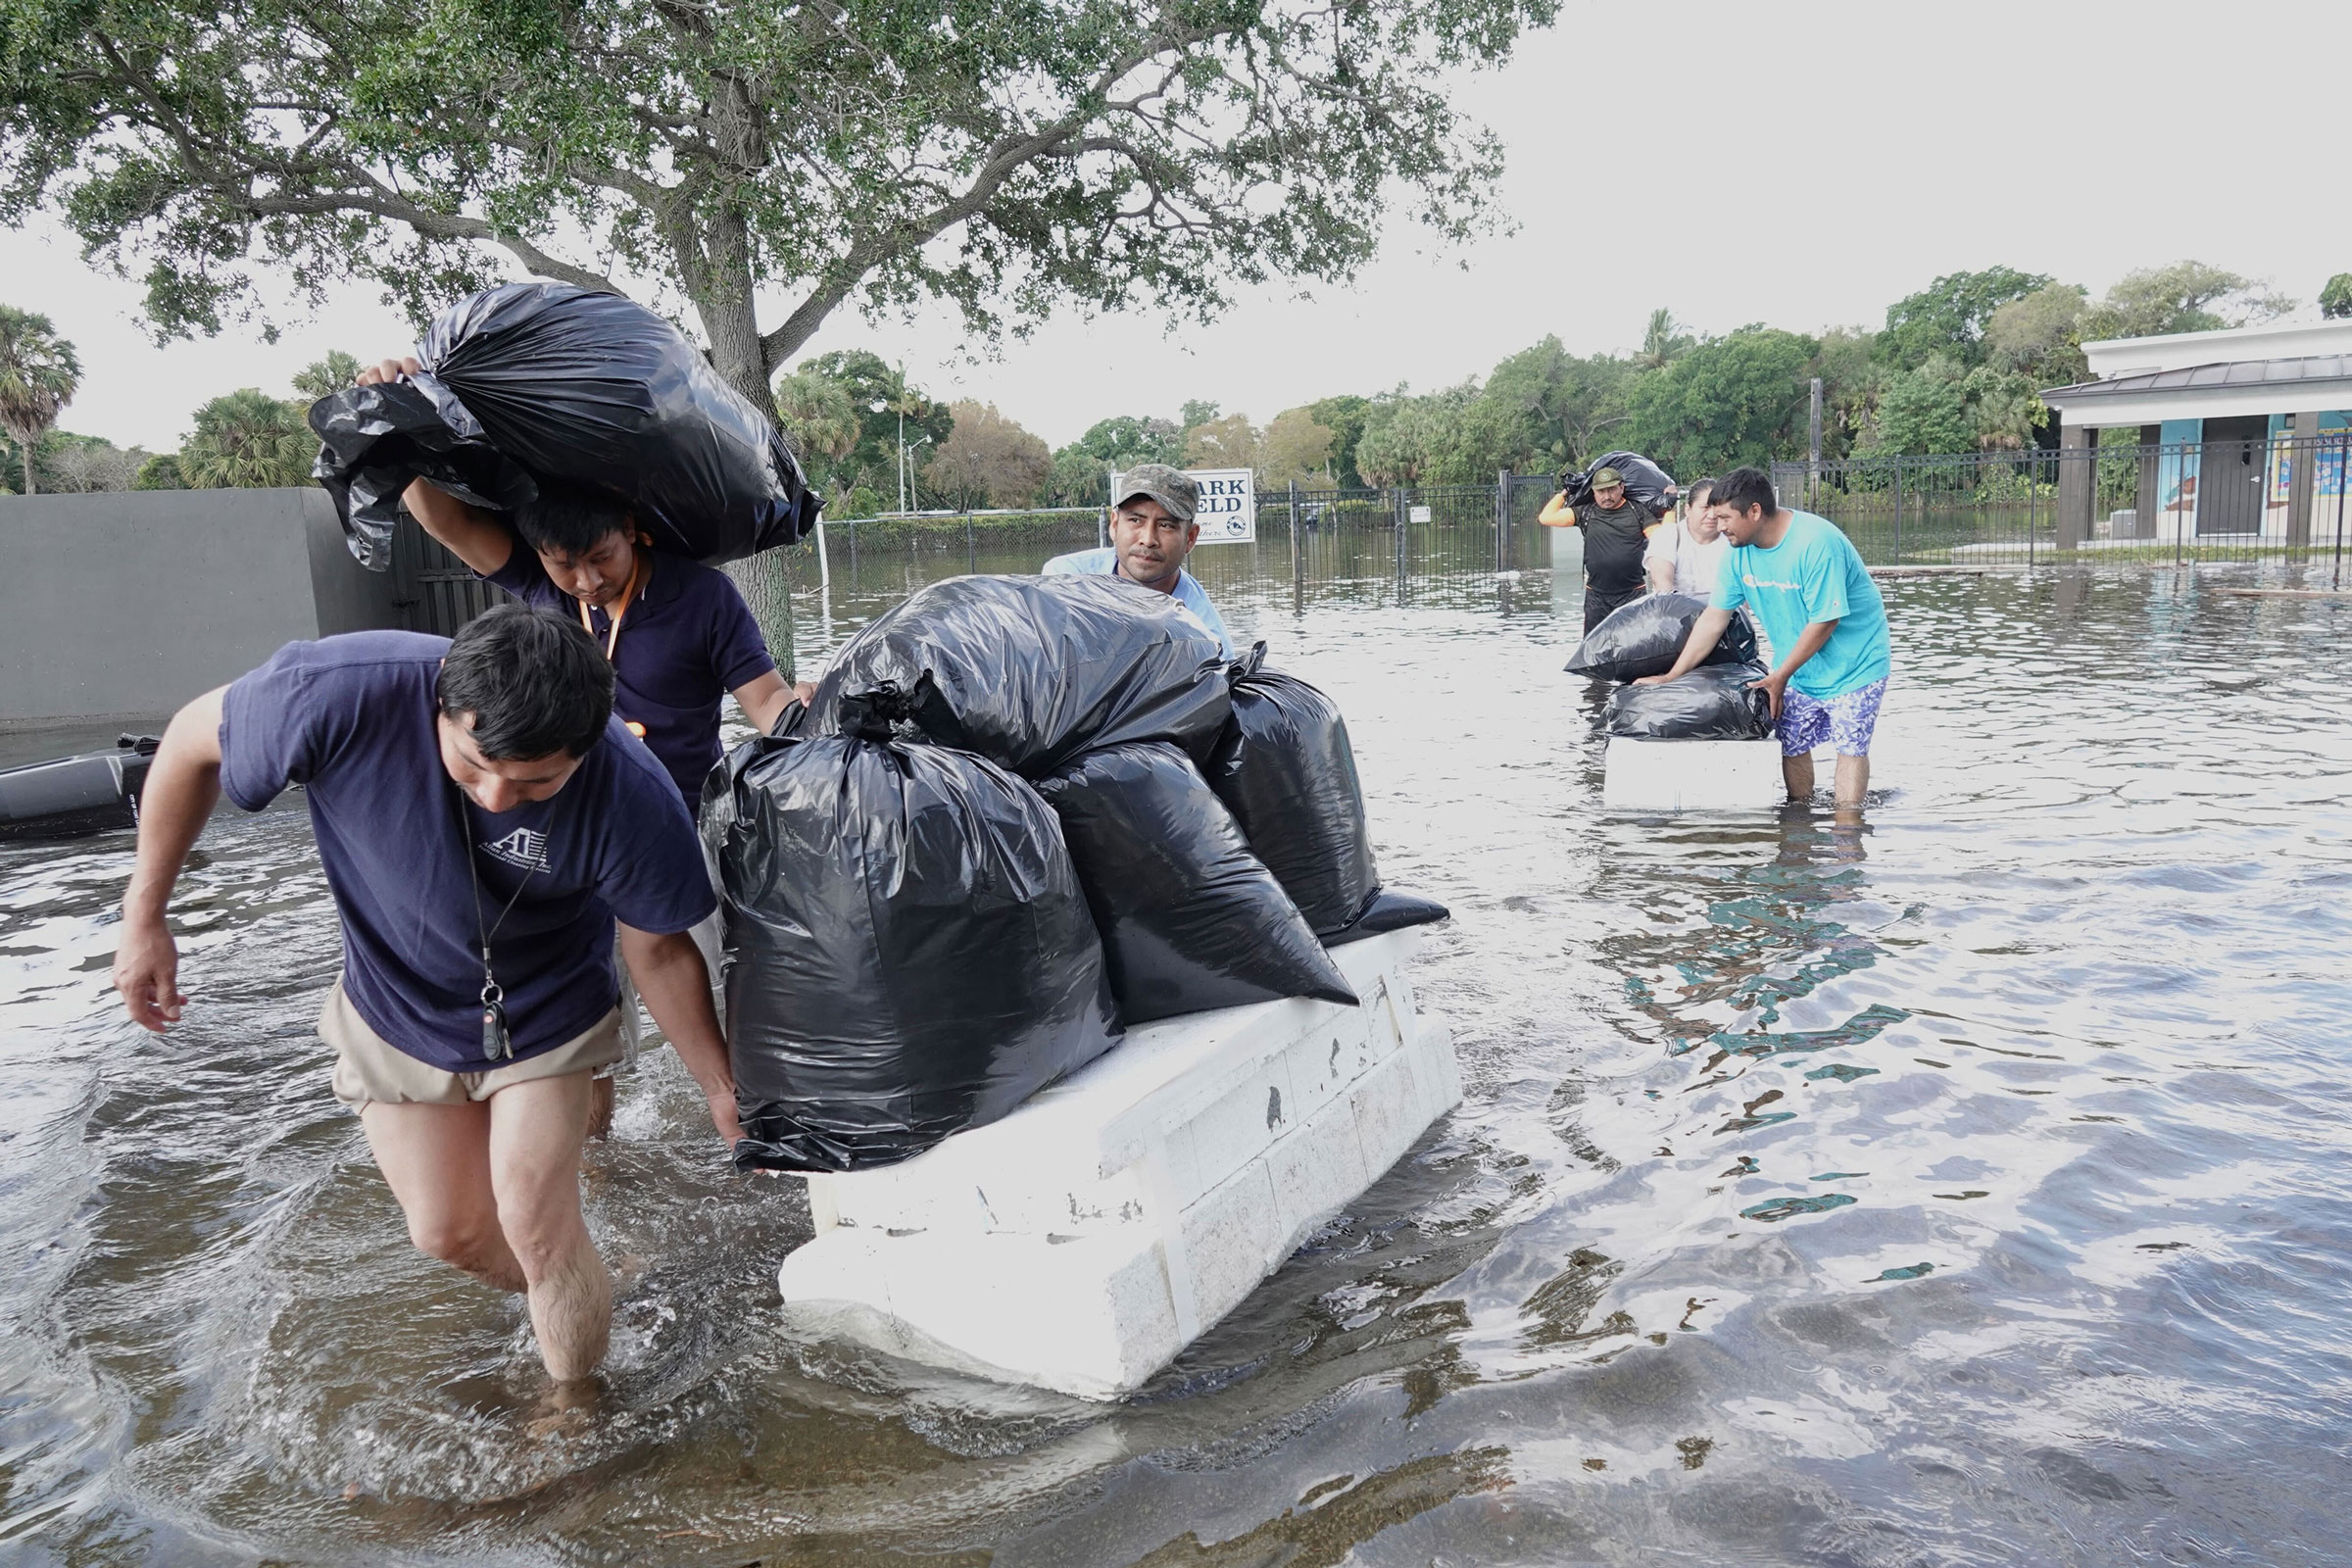 People try to save valuables as they wade through flood waters in the Edgewood neighborhood of Fort Lauderdale, Fla., on April 13, 2023.